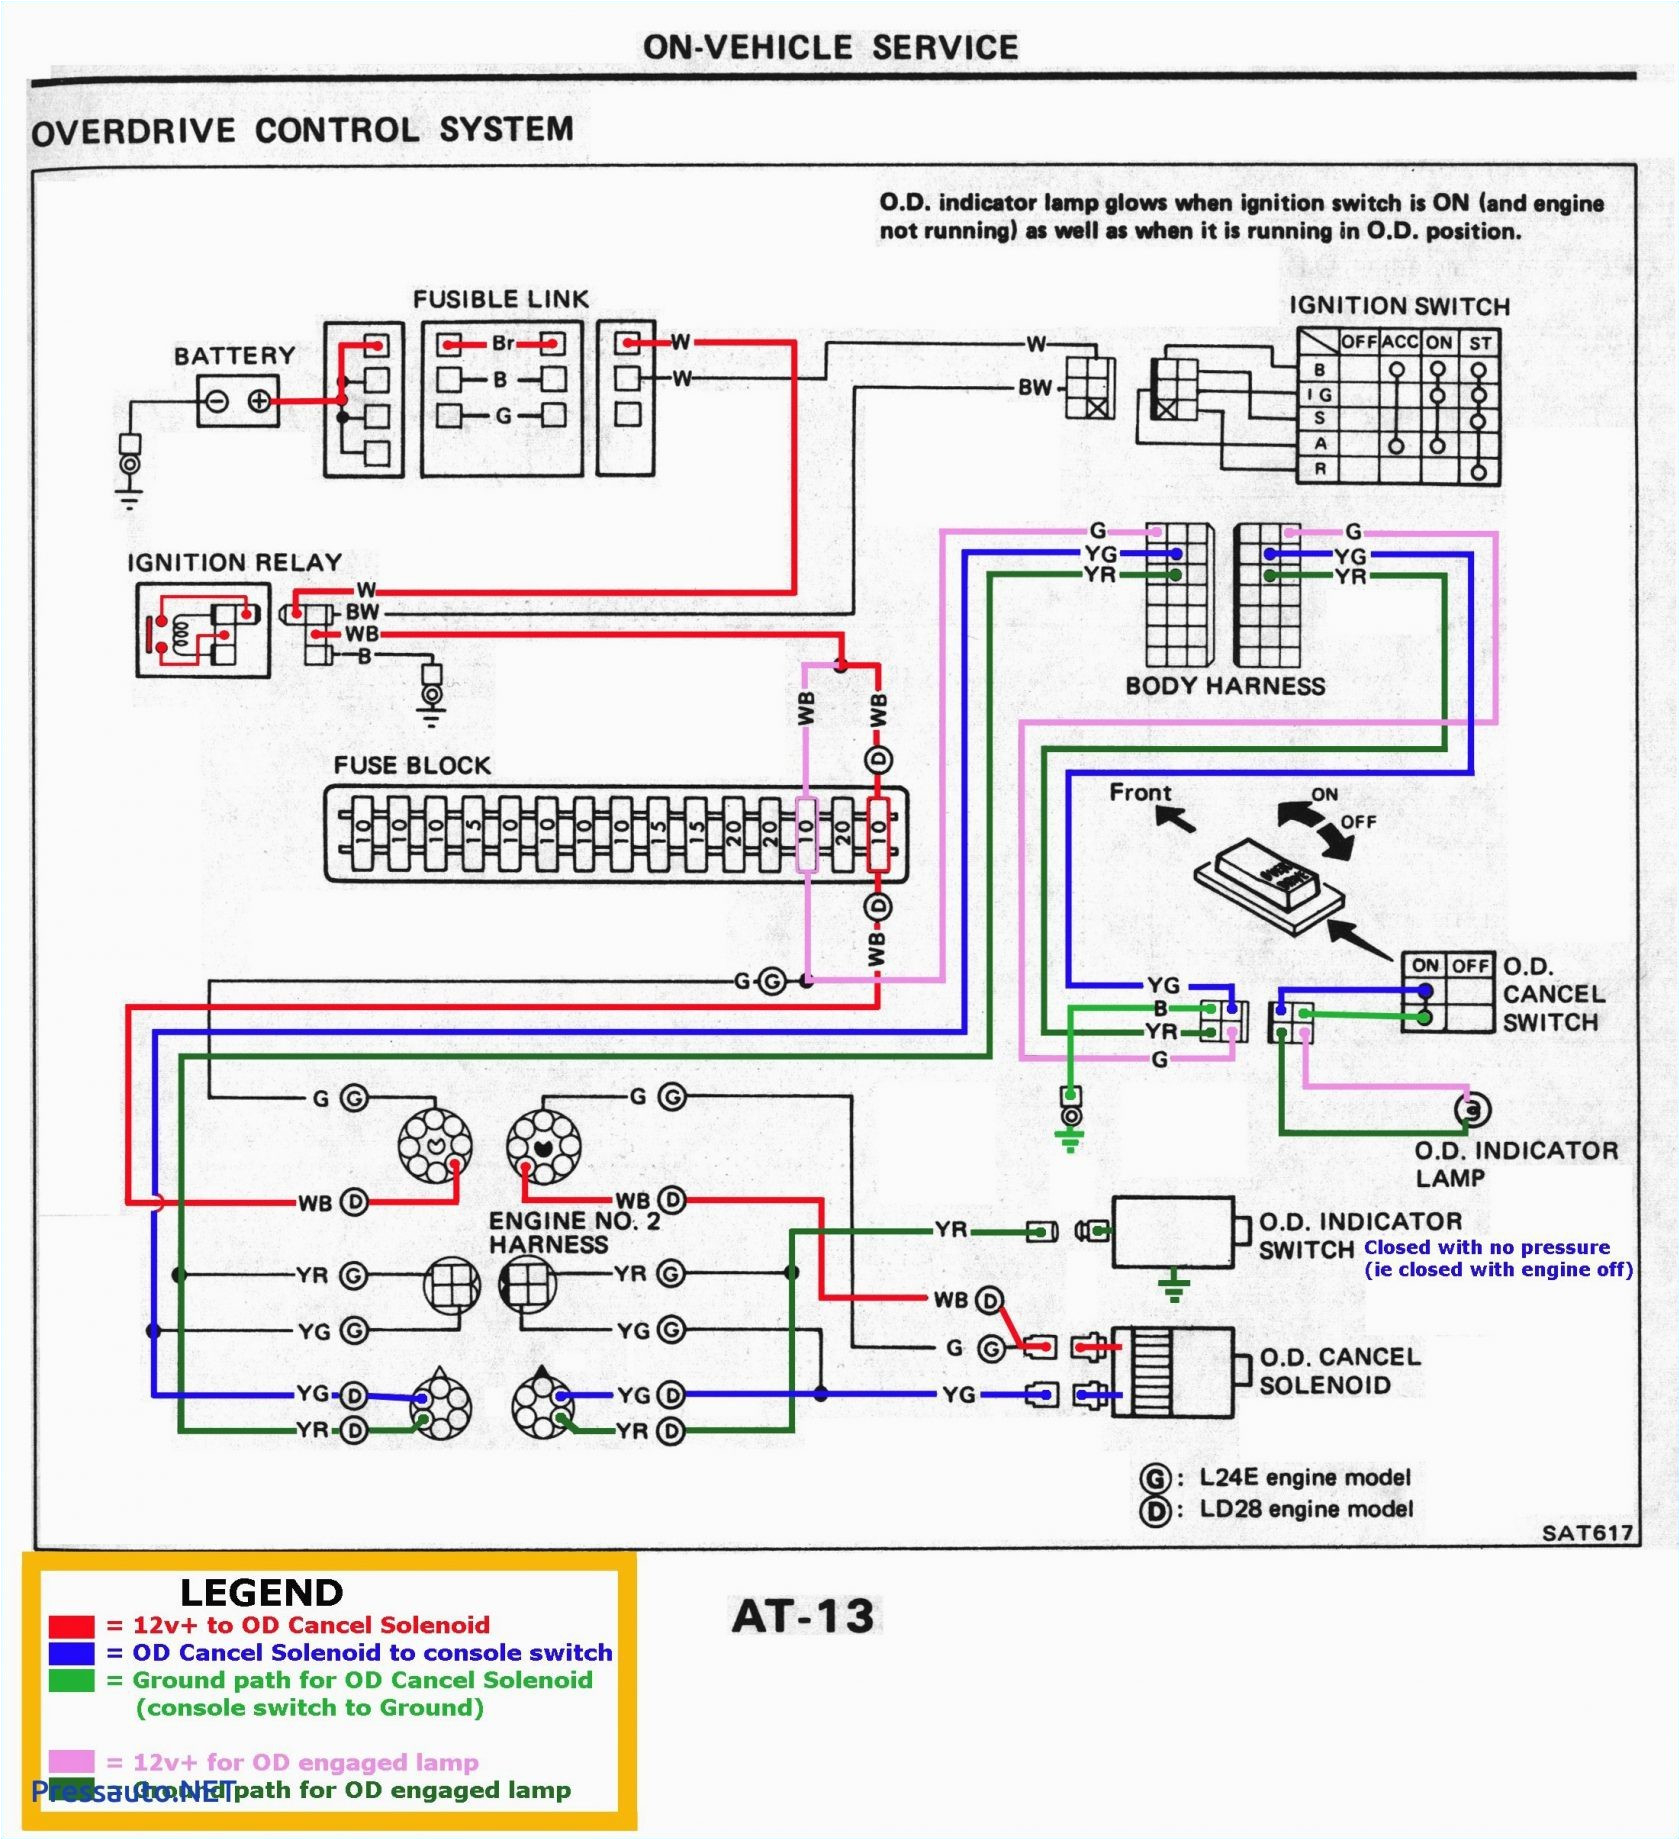 cable rs232 wiring diagram one way wiring diagrams recent cable rs232 wiring diagram one way